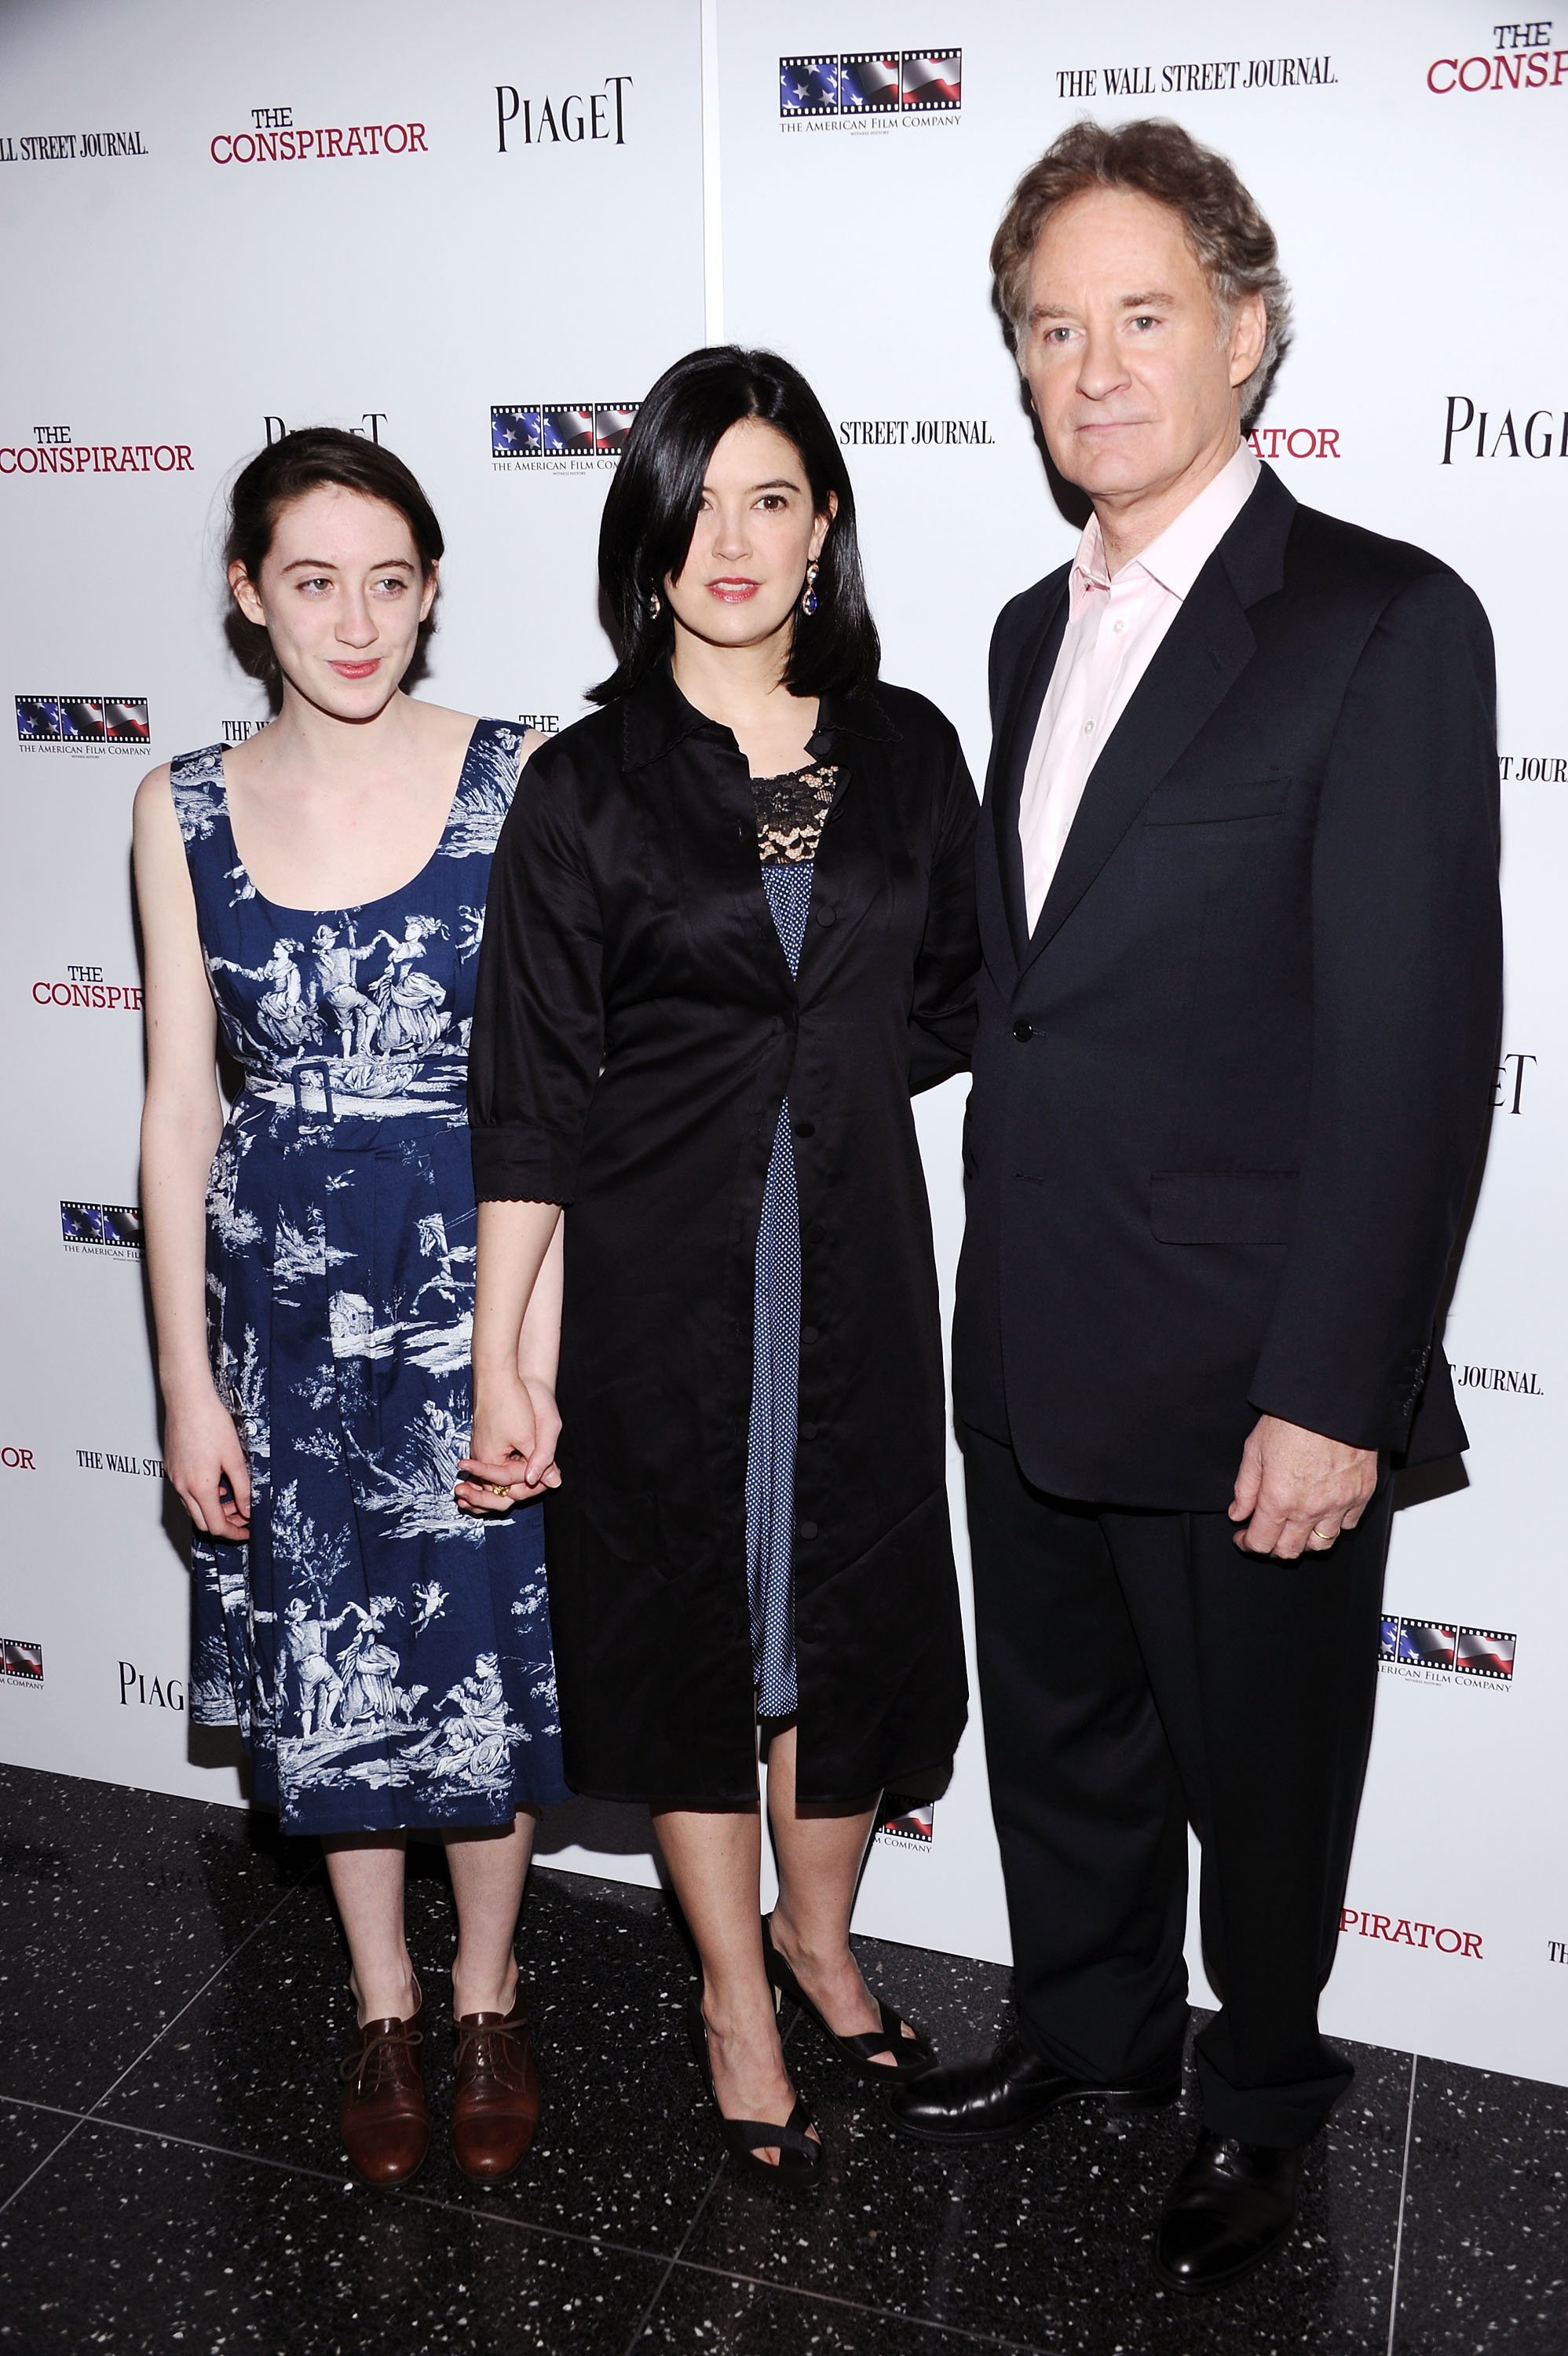 Phoebe Cates, Kevin Kline, and their daughter, Greta, at the premiere of “ The Conspirator” in New York City on April 11, 2011 | Source: Getty Images 